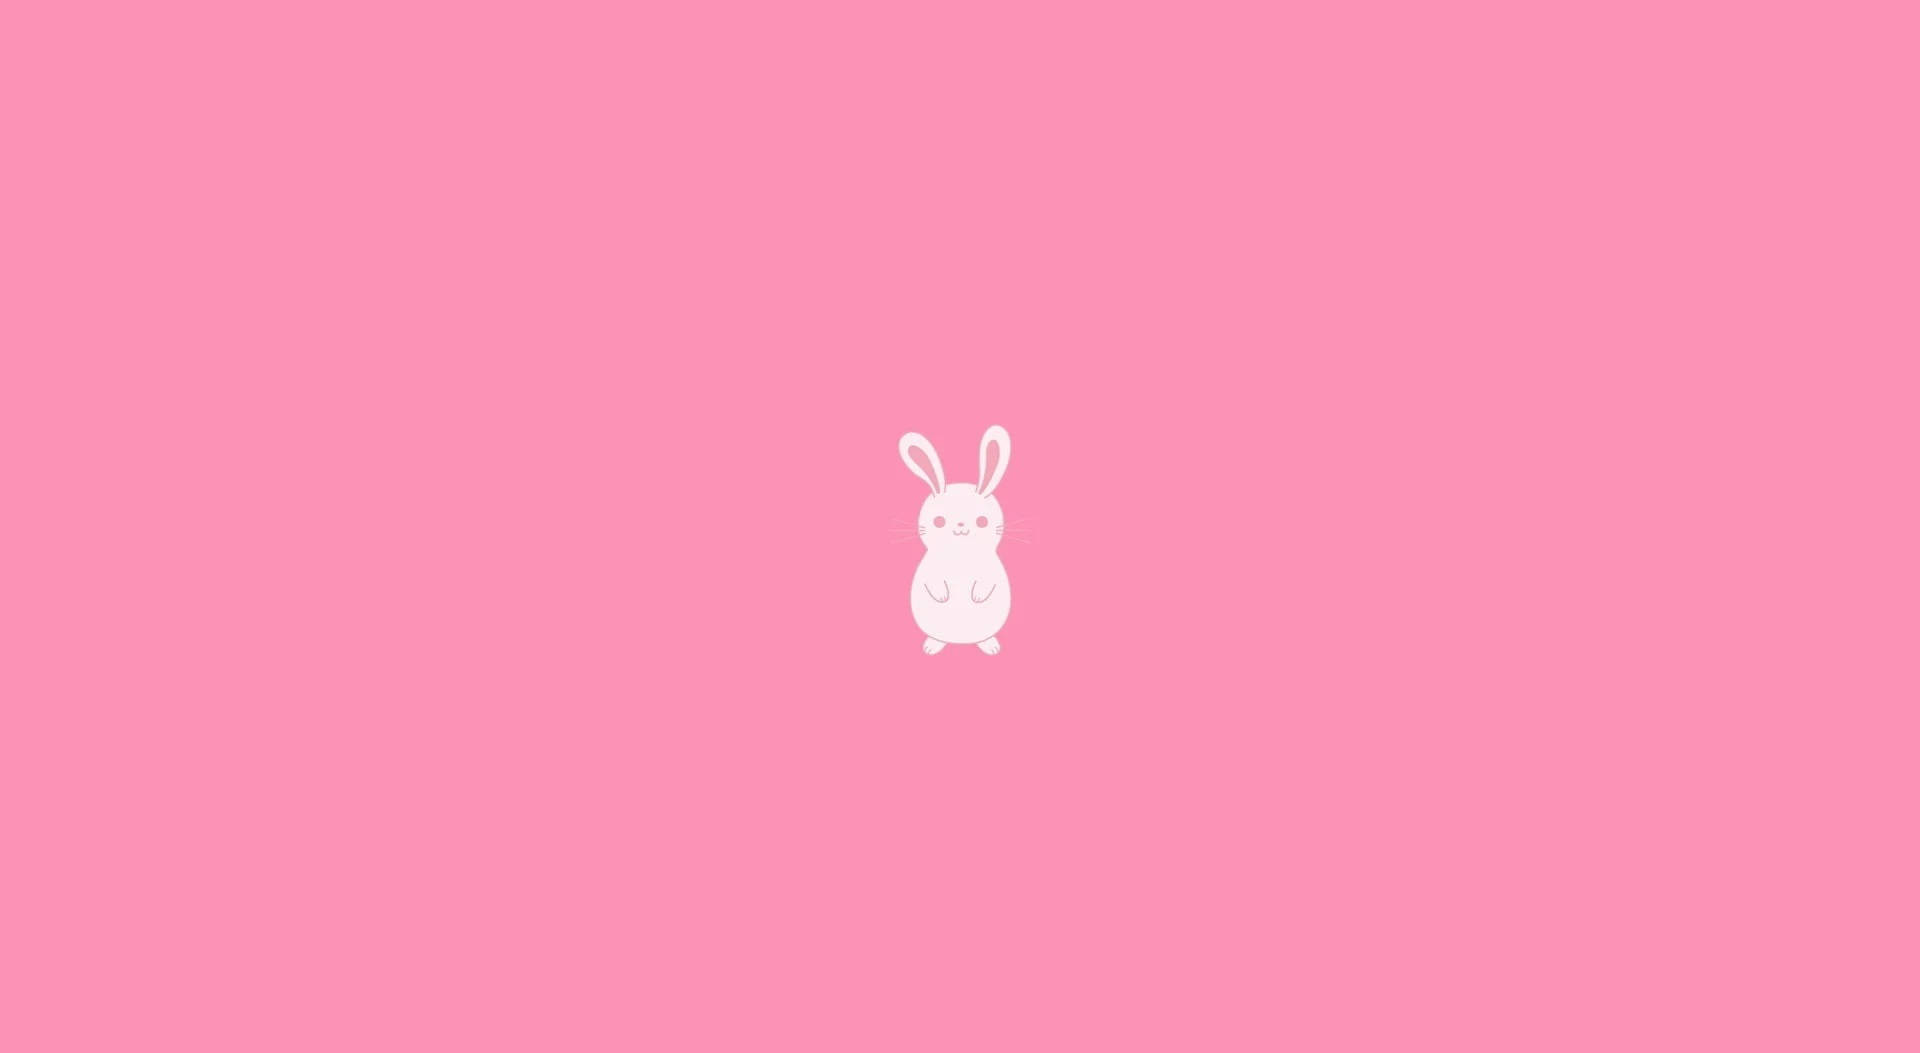 Download A White Rabbit On A Pink Background Wallpaper | Wallpapers.com